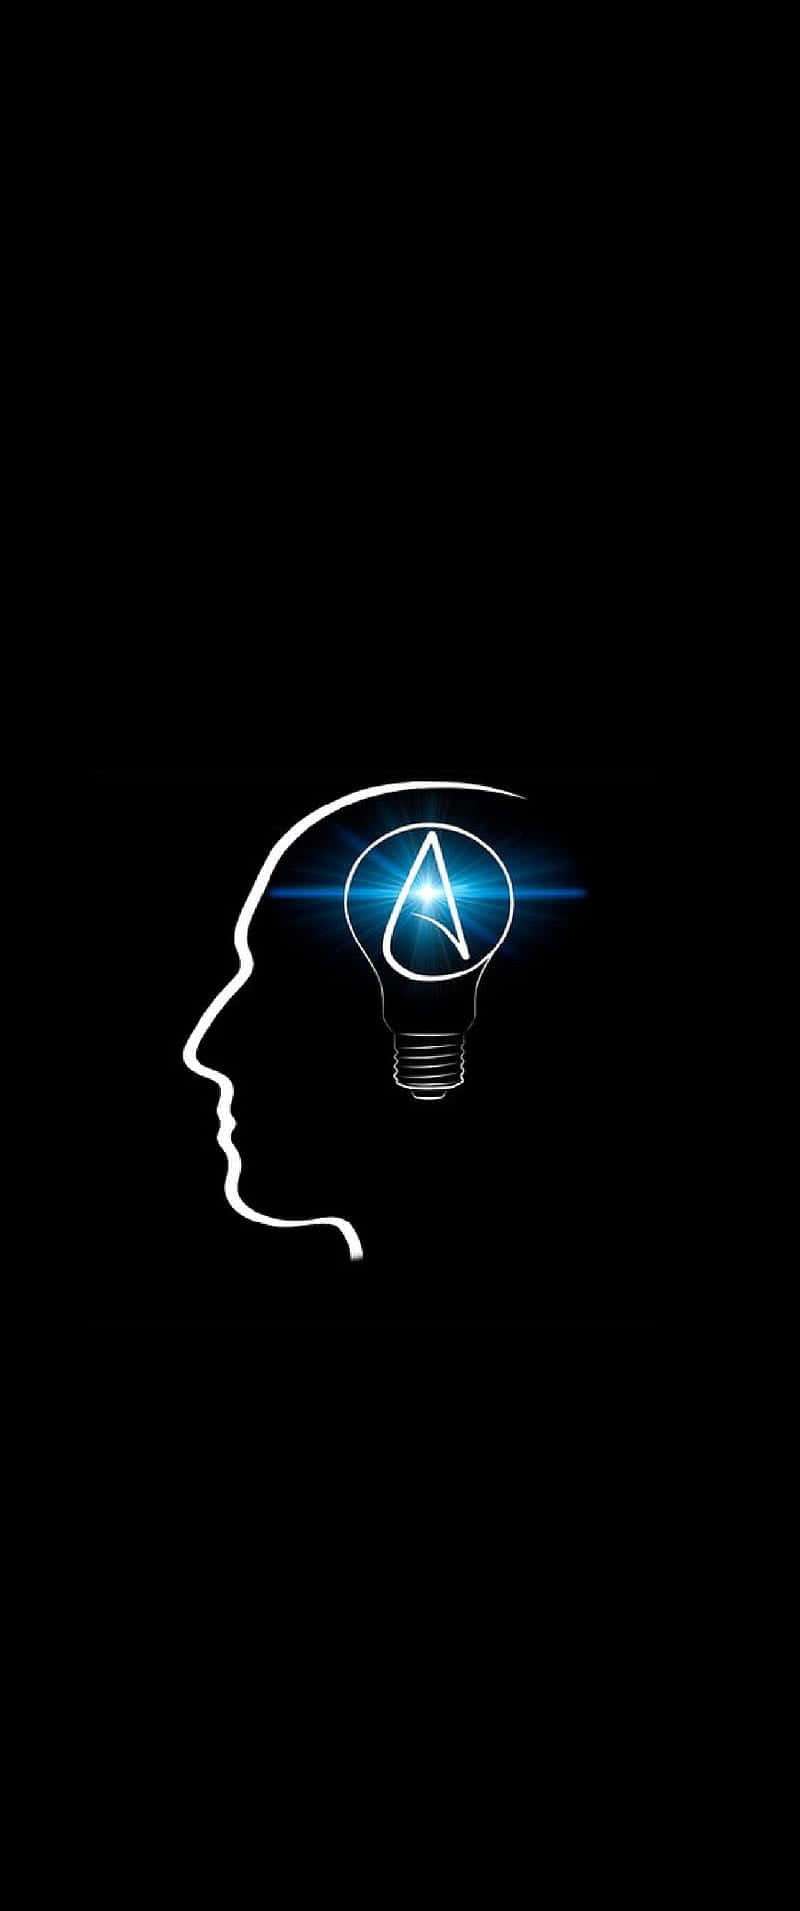 A Logo With A Light Bulb In The Head Wallpaper